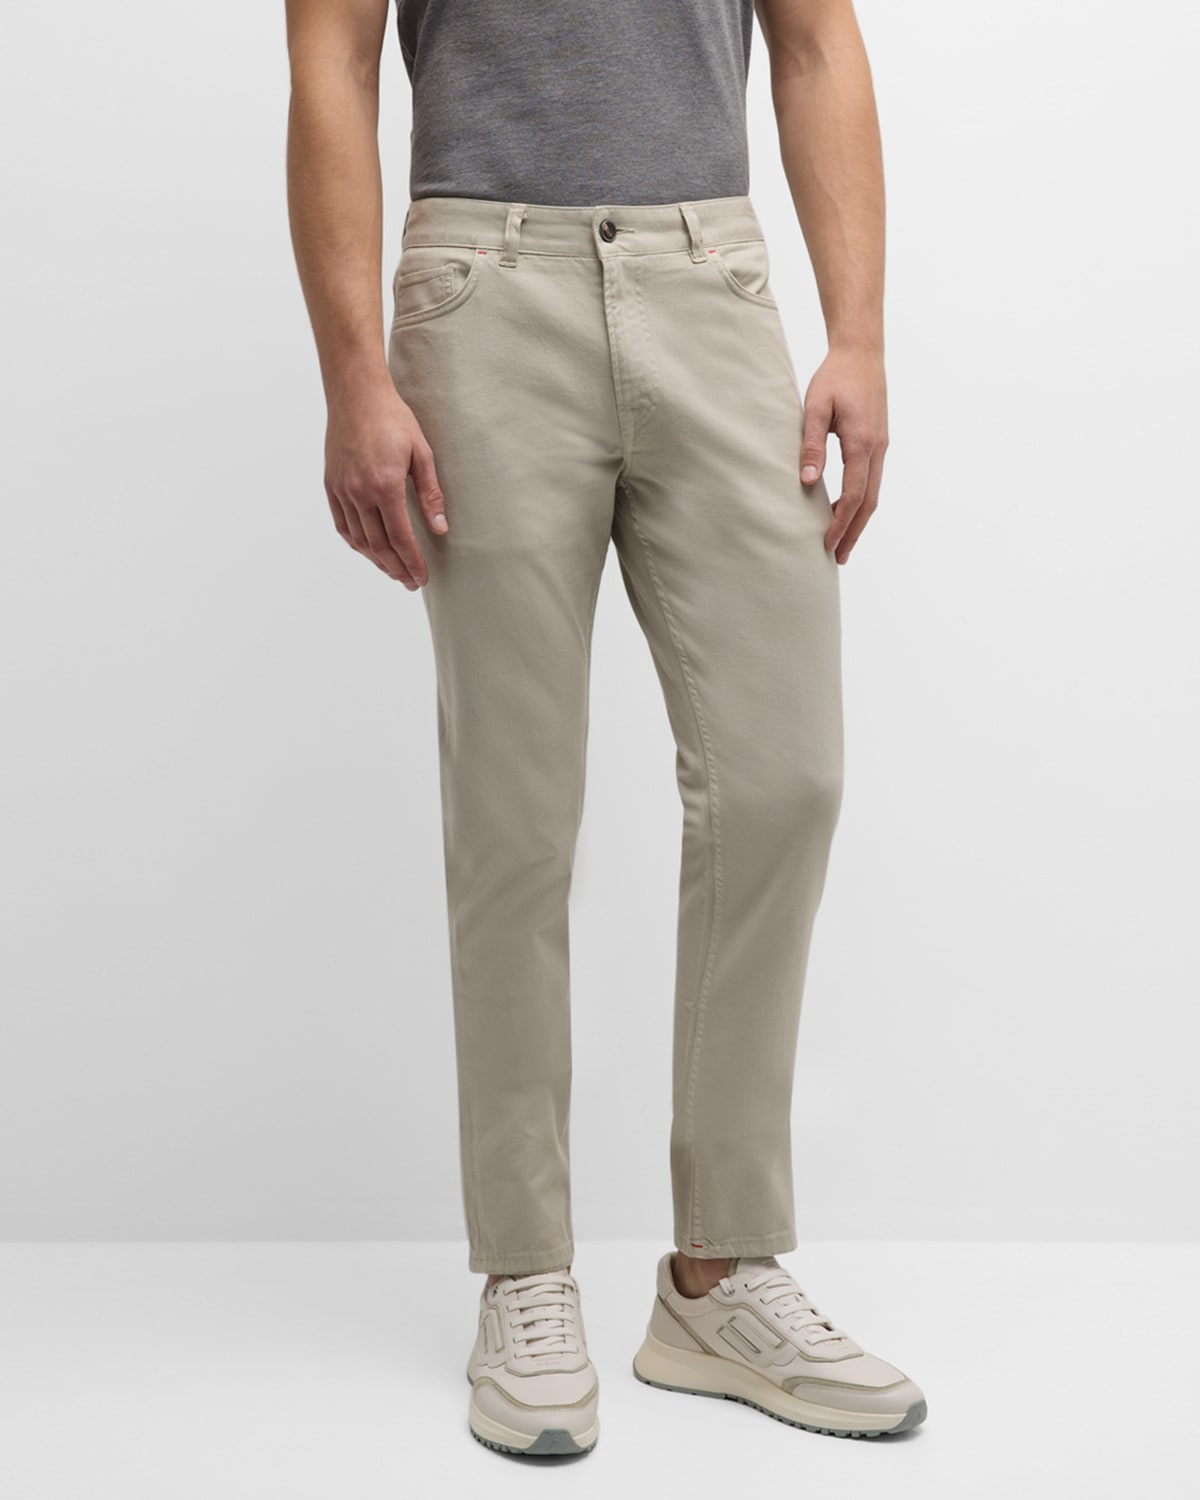 Isaia Men's Tapered Leg 5-pocket Pants In Light Brow